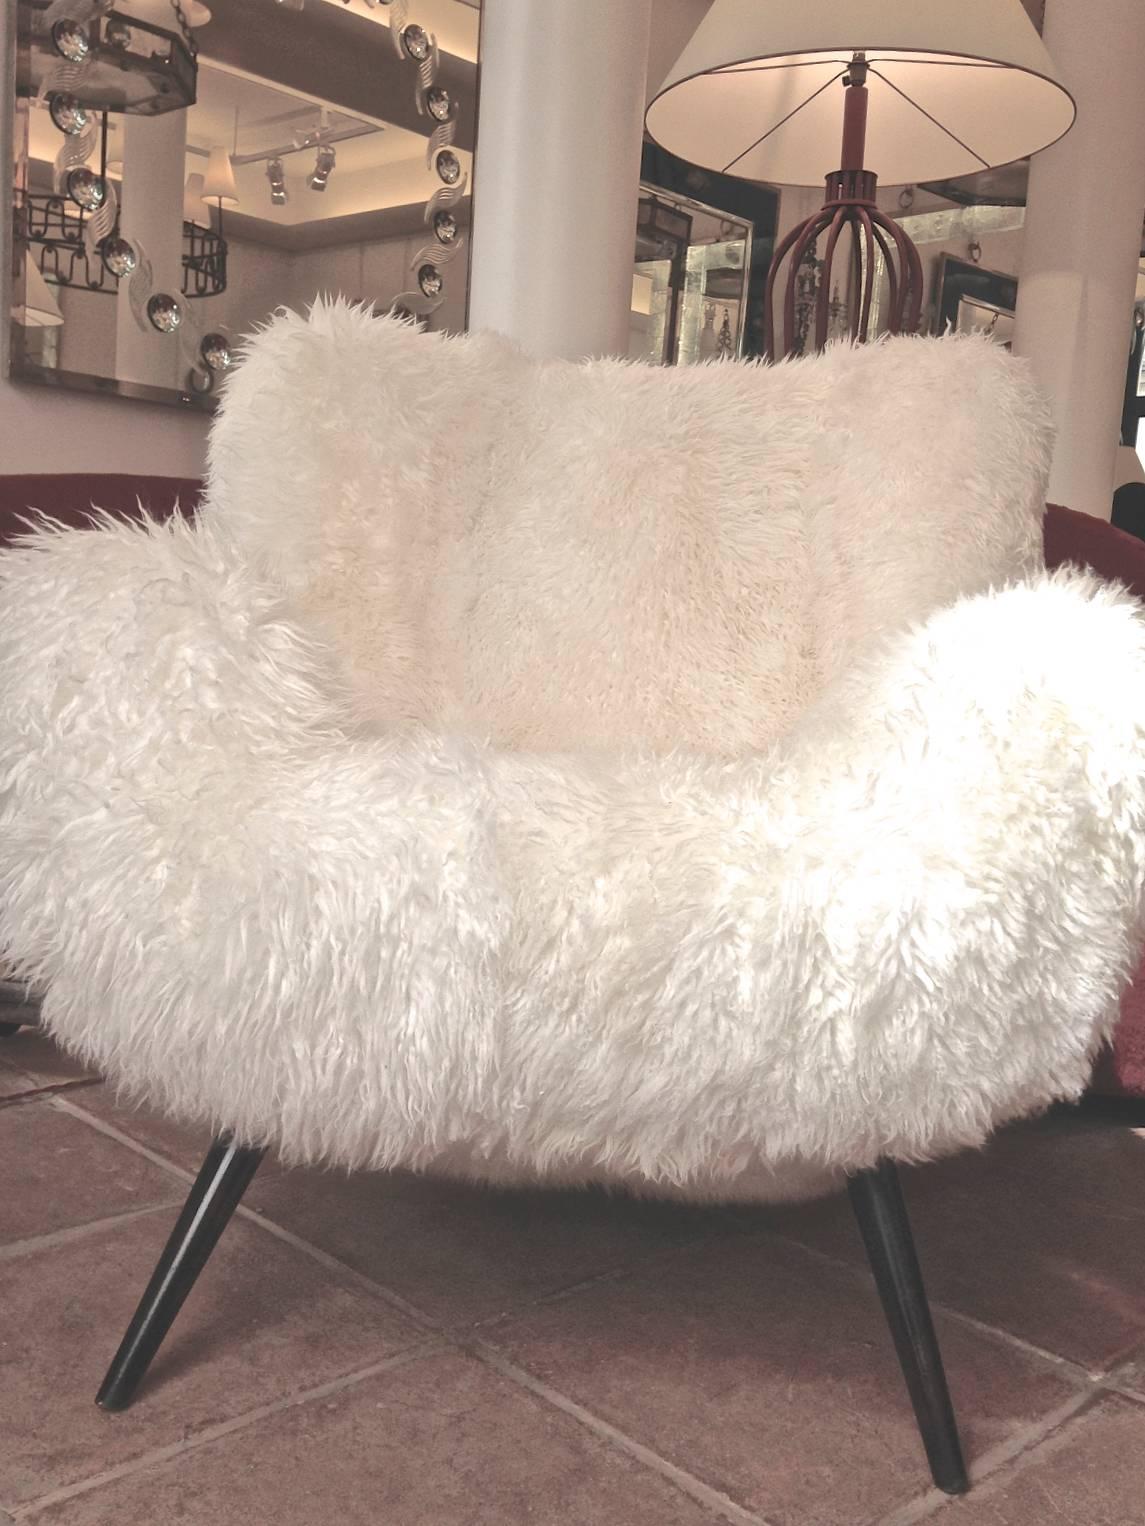 Fritz Neth Rarest Spectacular Wood Legged Lounge Chairs Covered in Sheepskin Fur In Excellent Condition For Sale In Paris, ile de france